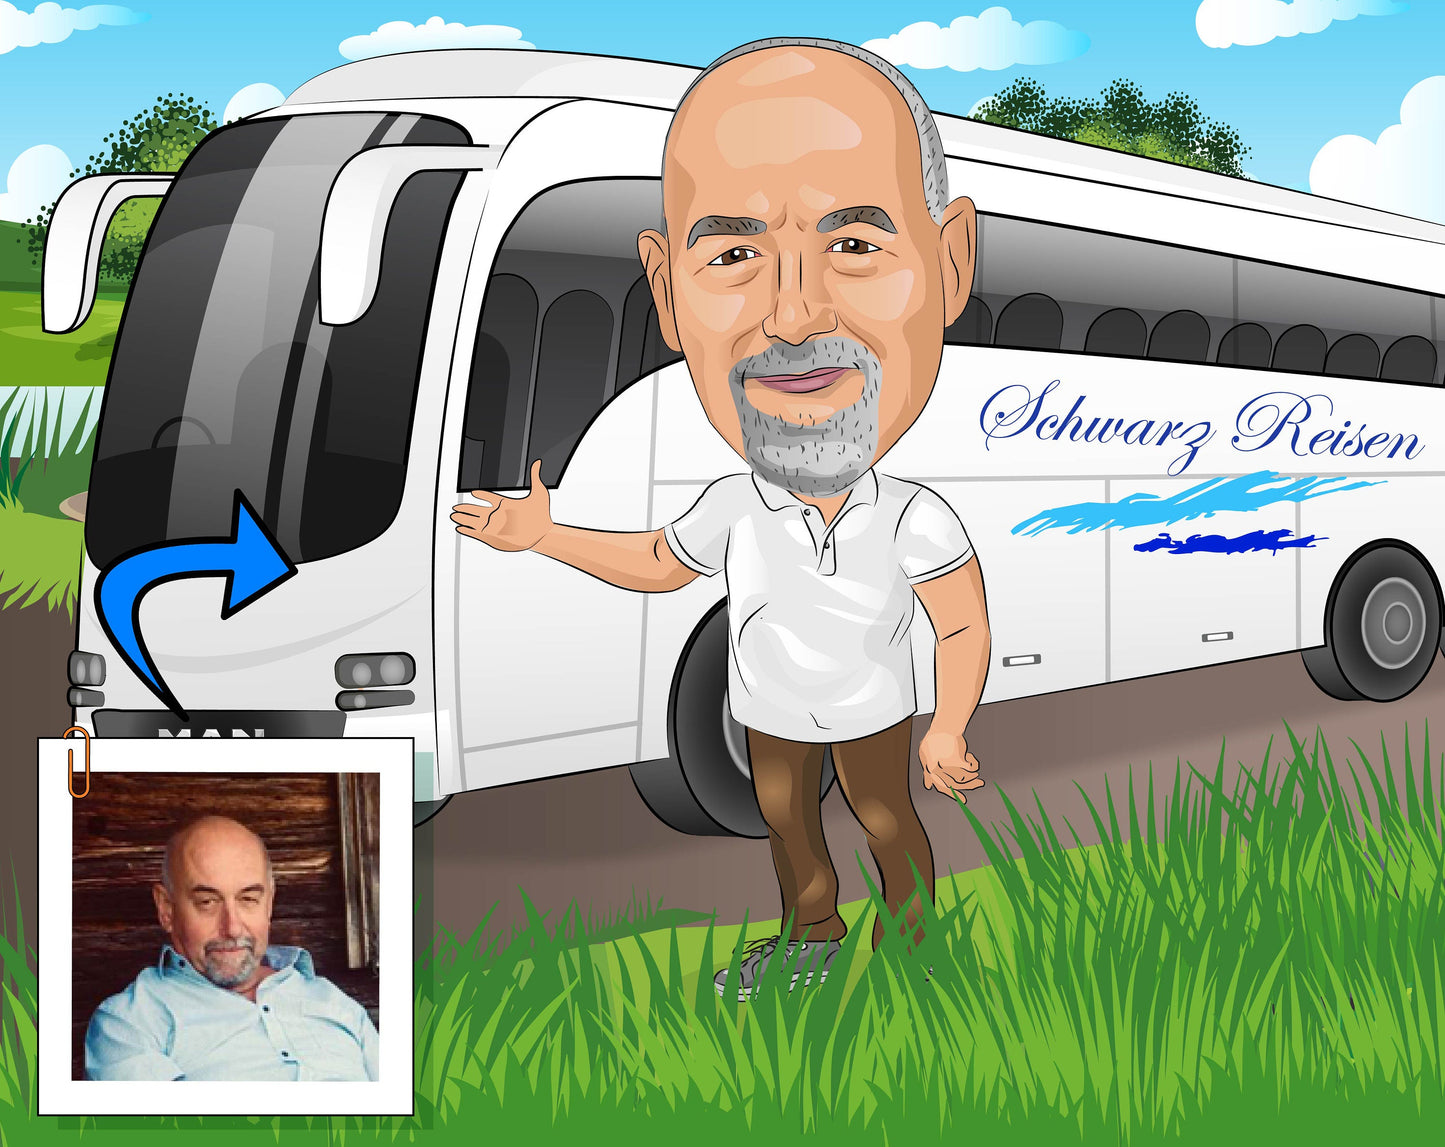 Otolaryngologist Gift - Custom Caricature Portrait From Your Photo/ENT doctor